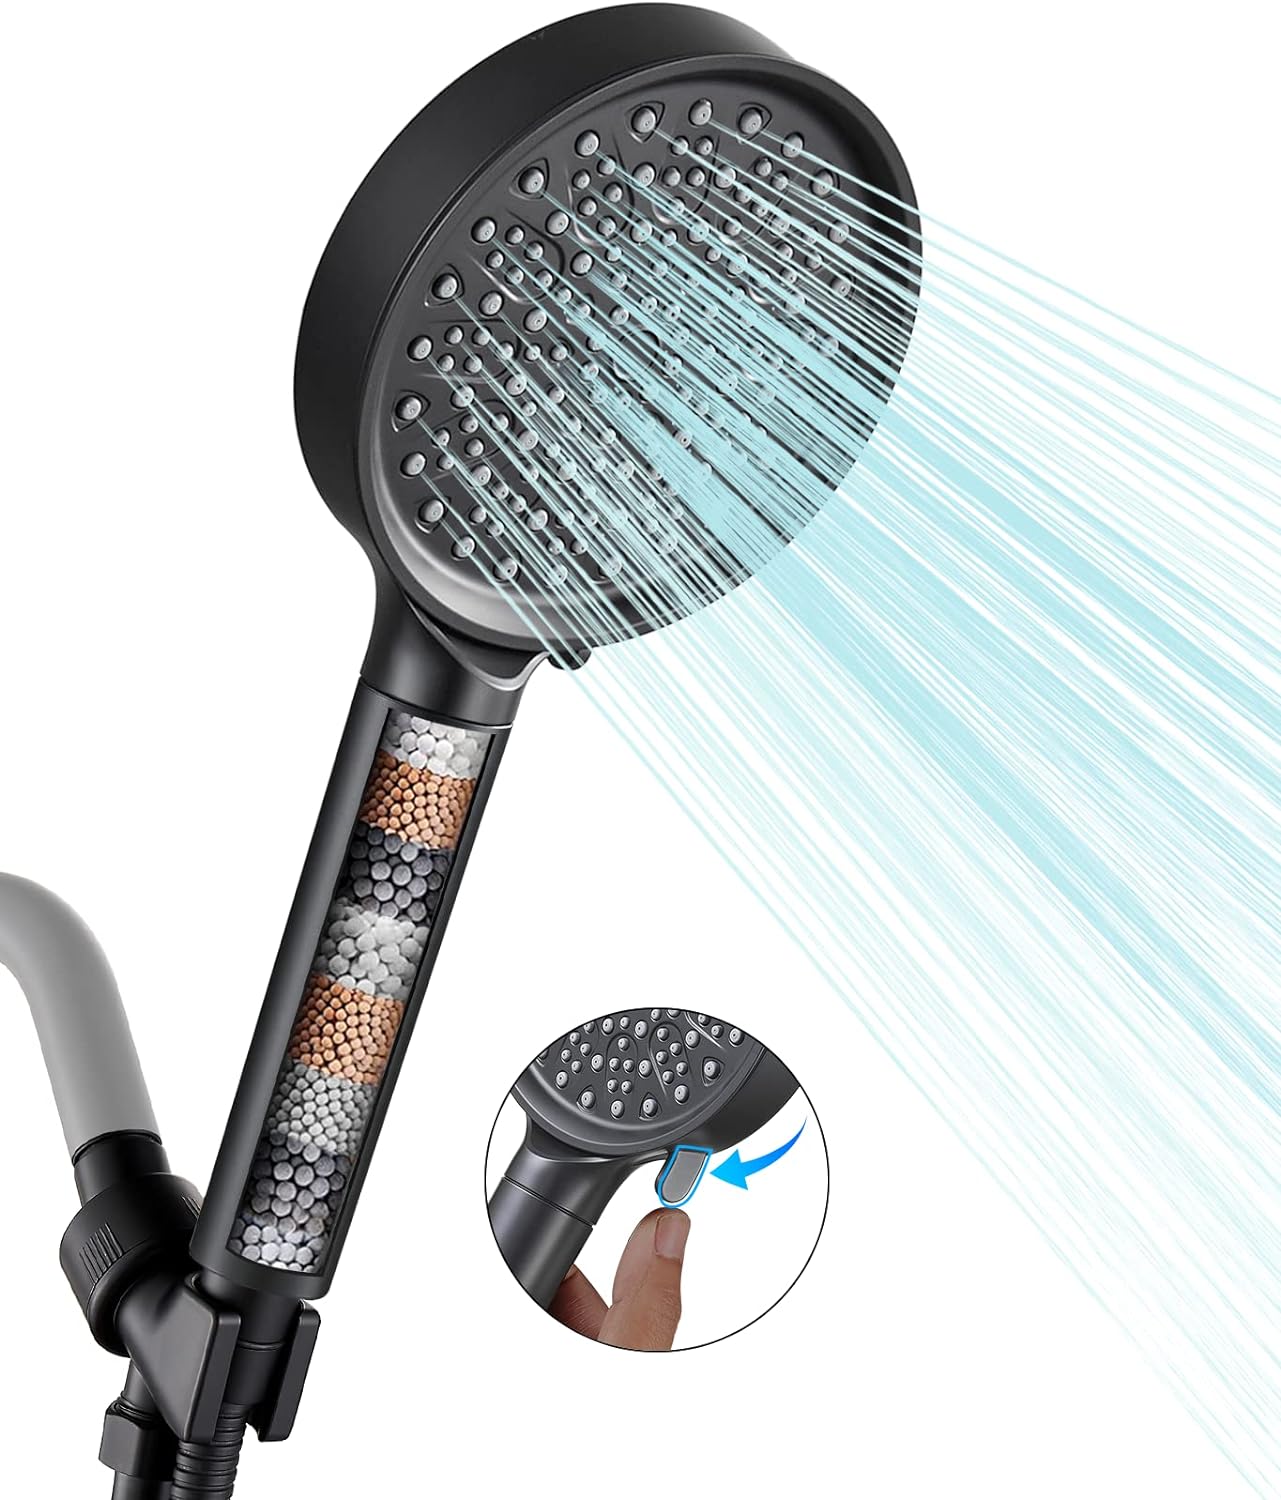 Okay, folks, let me tell you about this Ashwanth shower head I installed. It' like I've discovered a whole new world in my bathroom! Before this, I'd take a shower once a month, maybe. It was a chore, like doing taxes. But now I'm in there twice a day, and on Sundays, it' a full-on shower marathon!This thing isn't just a shower head; it' like my own personal rain cloud. I step in, and voila! I'm under a mini waterfall. It' so fancy, it feels like I'm in one of those expensive spa retreats. 